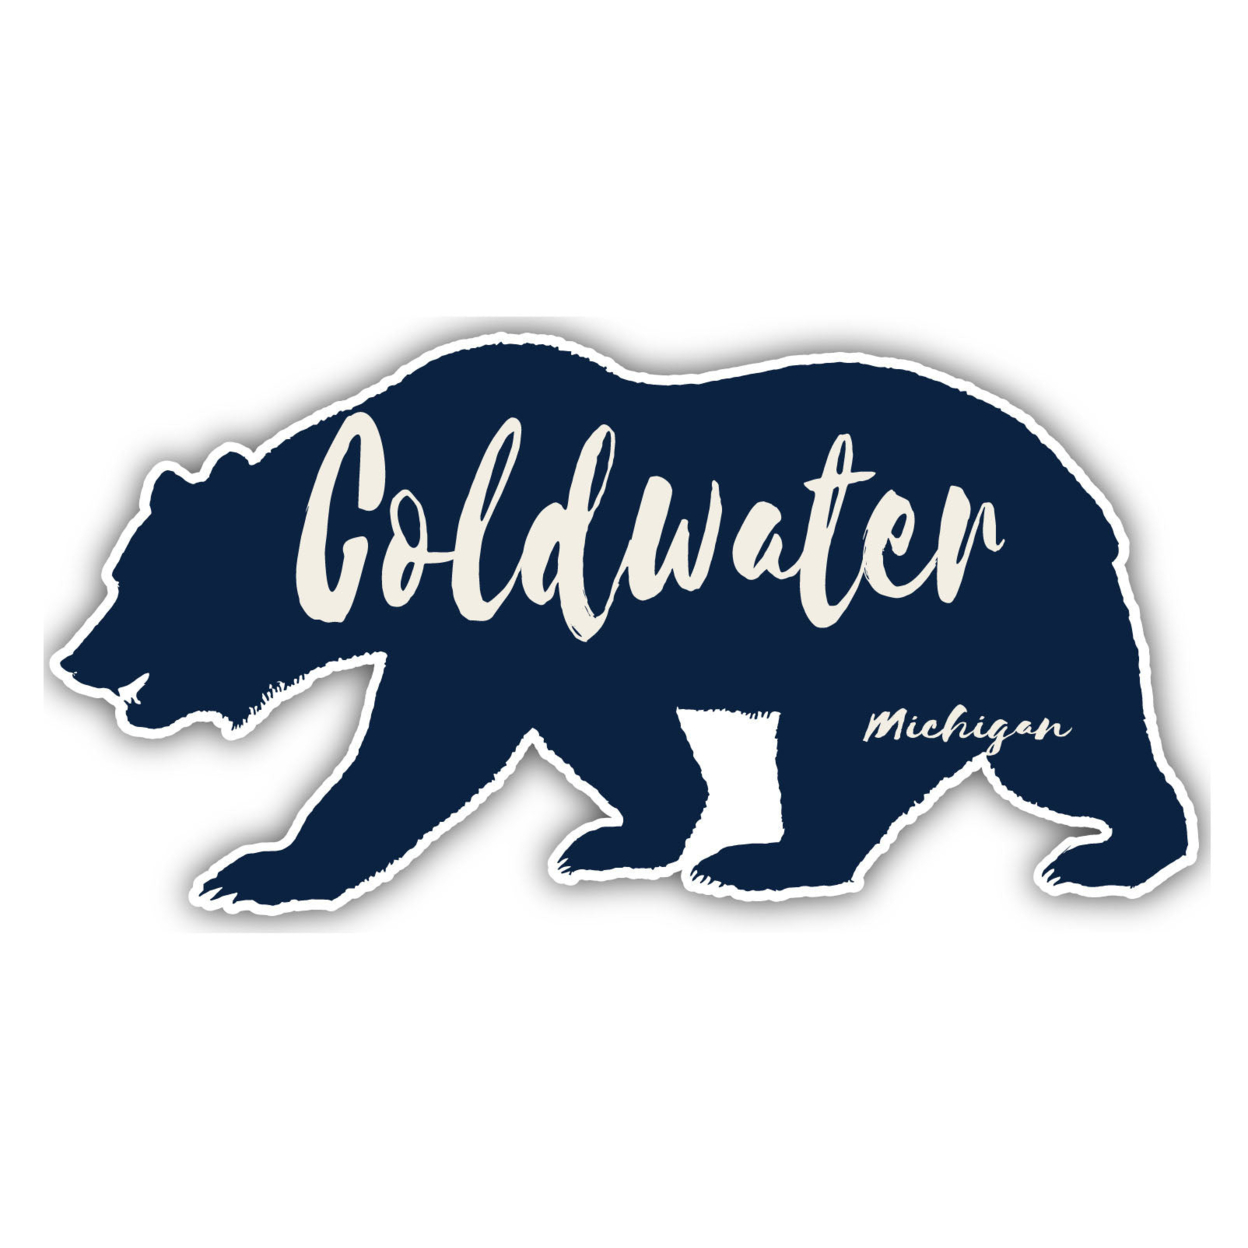 Coldwater Michigan Souvenir Decorative Stickers (Choose Theme And Size) - 4-Pack, 4-Inch, Bear